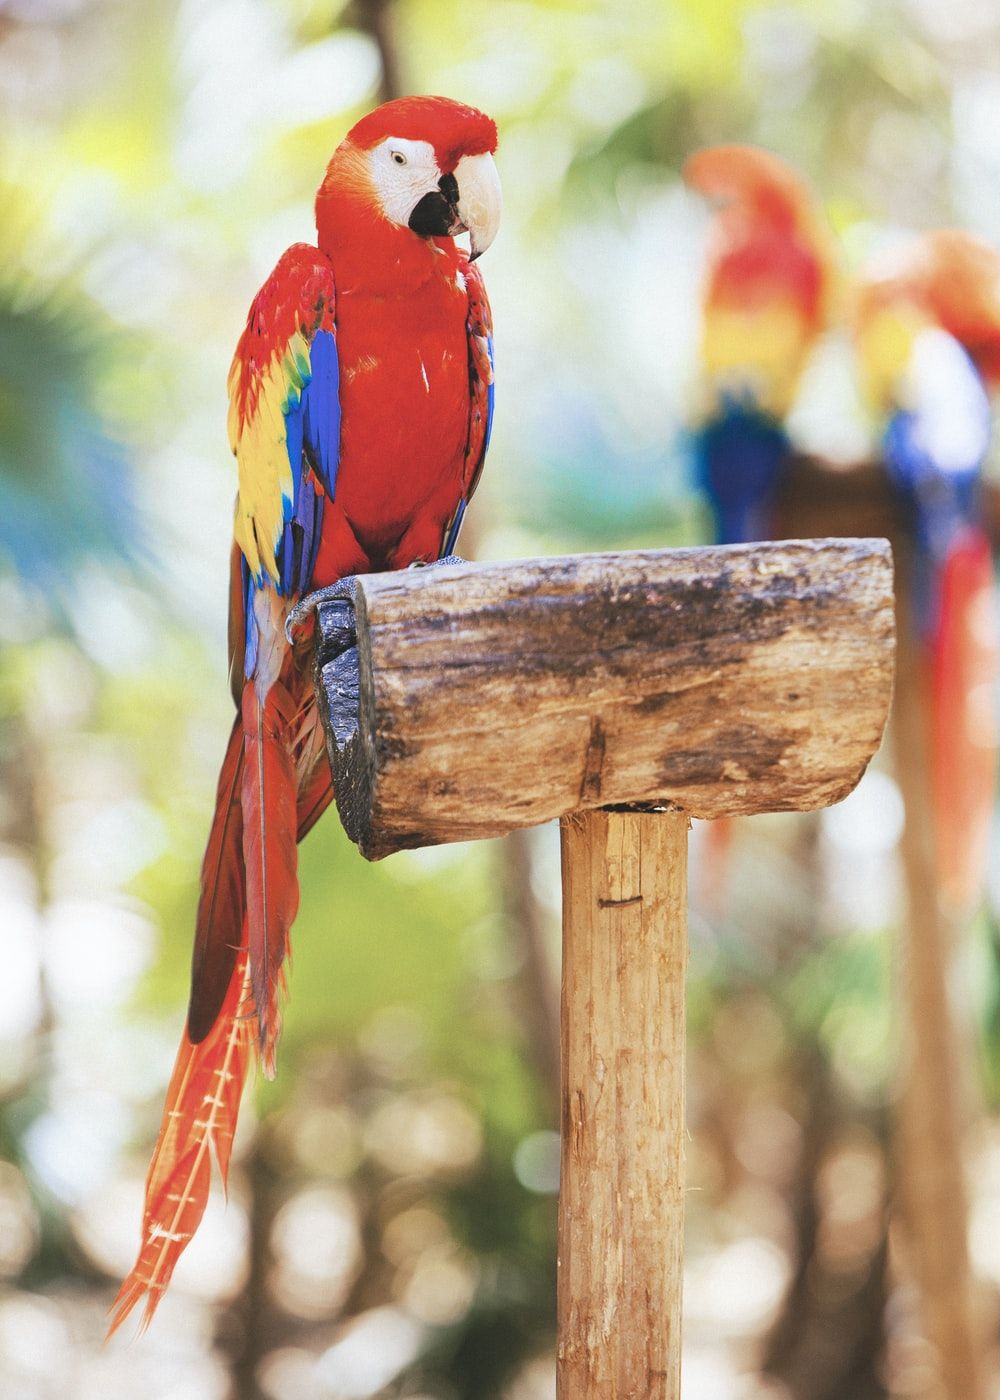 Macaw Picture [HD]. Download Free Image